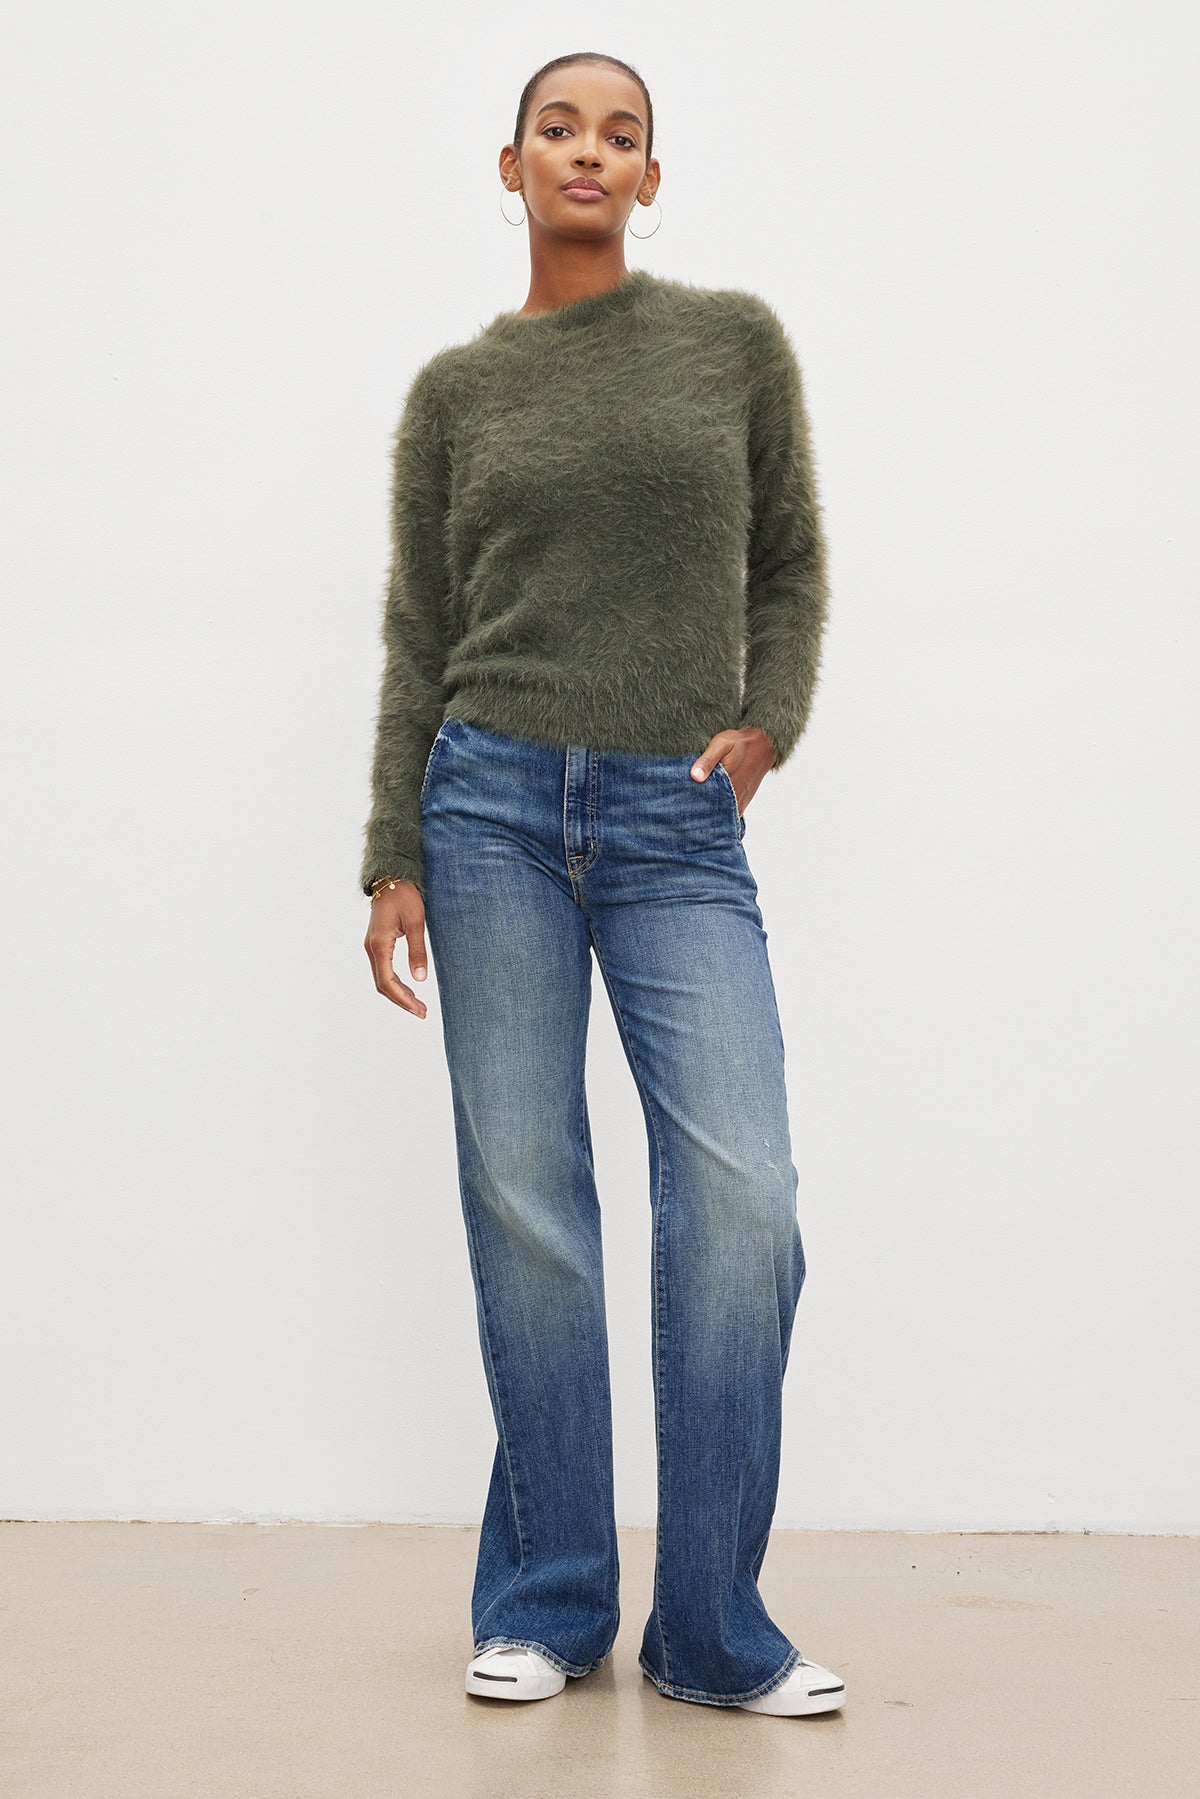 The model is wearing a Velvet by Graham & Spencer RAY FEATHER YARN CREW NECK SWEATER and flared jeans.-35572011434177